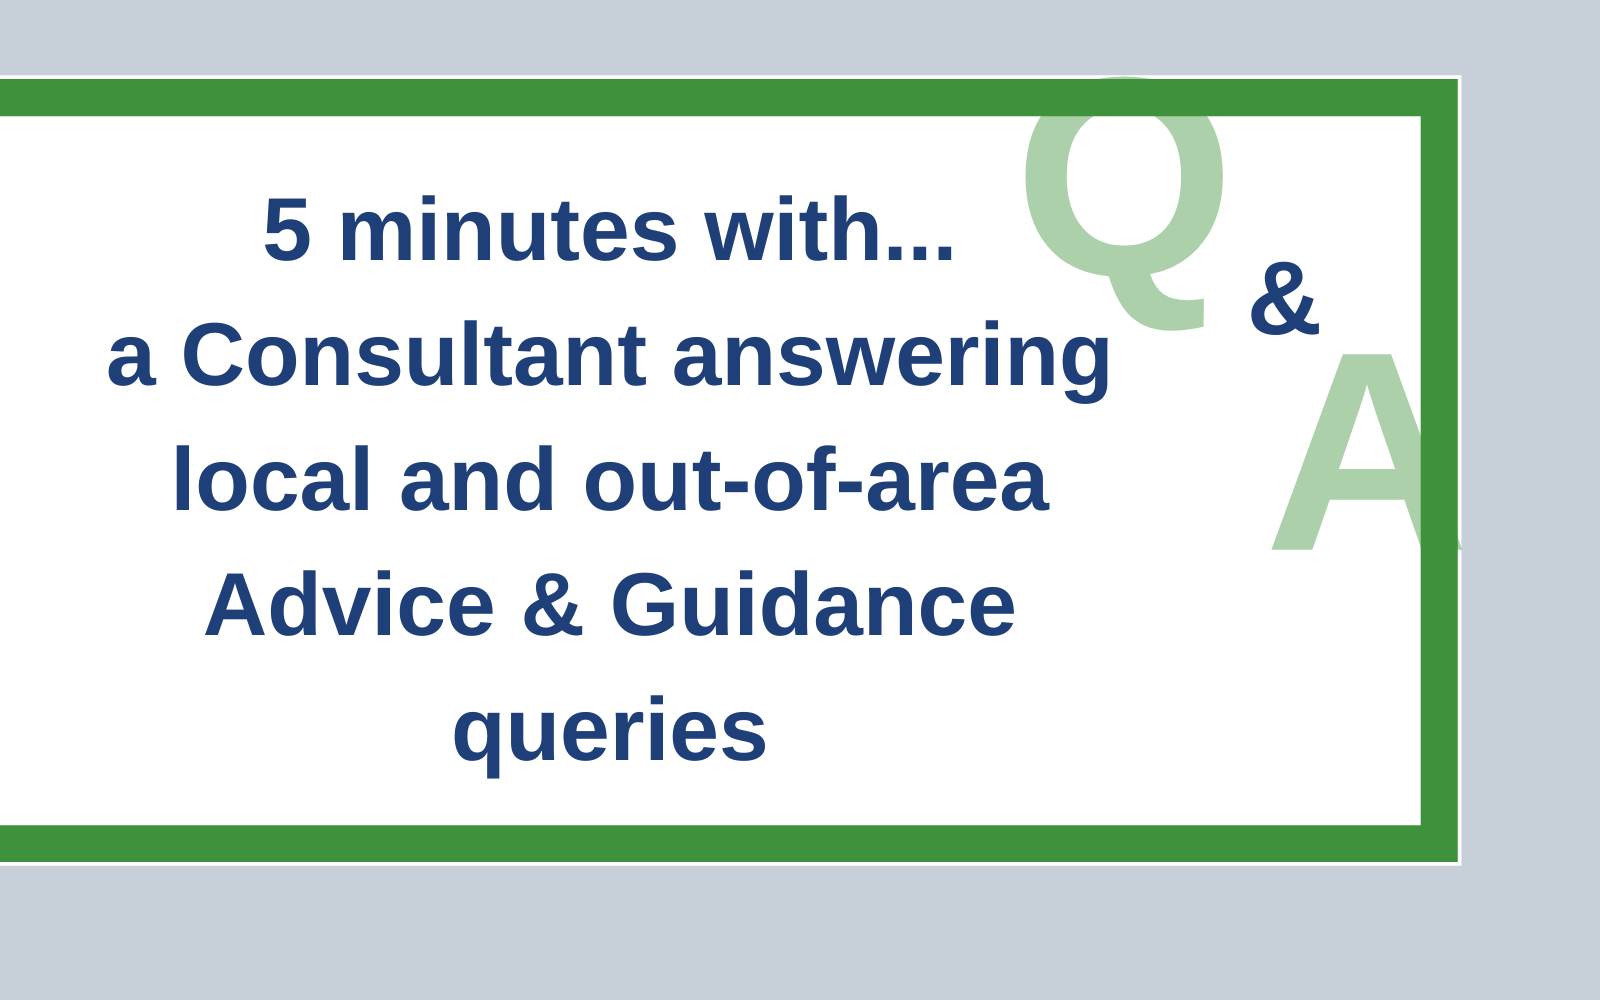 5 minutes… with a Consultant answering local and out-of-area Advice & Guidance queries - Consultant Connect